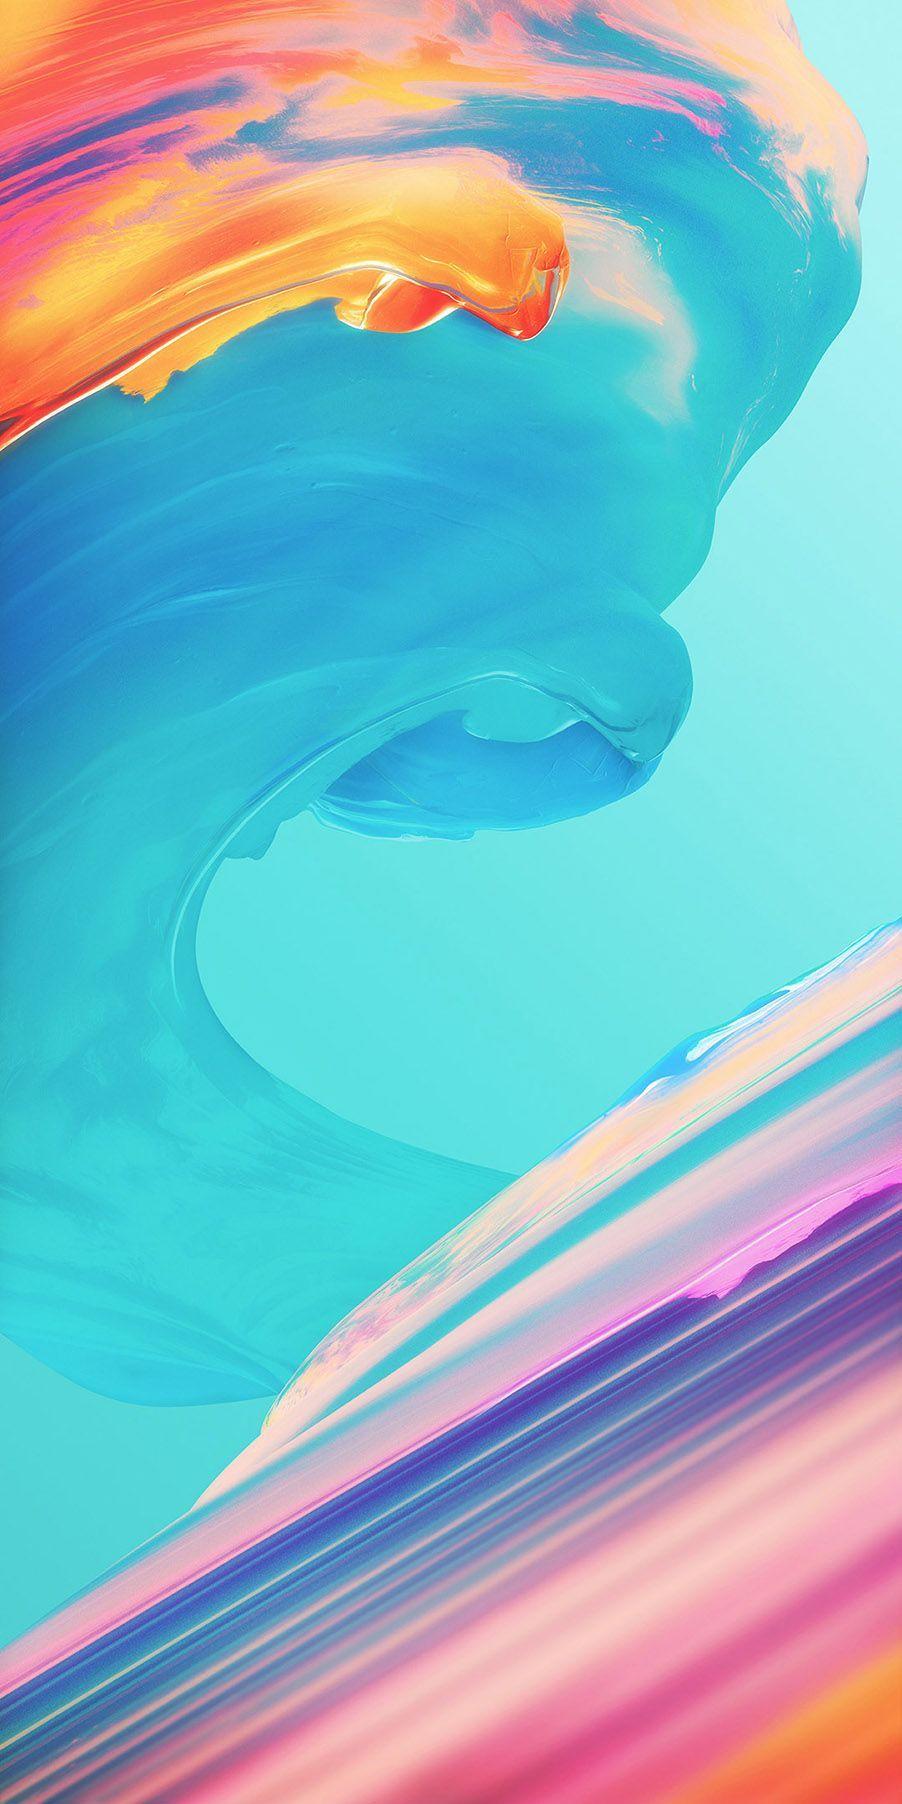 Official One Plus 5t Wallpaper (download)